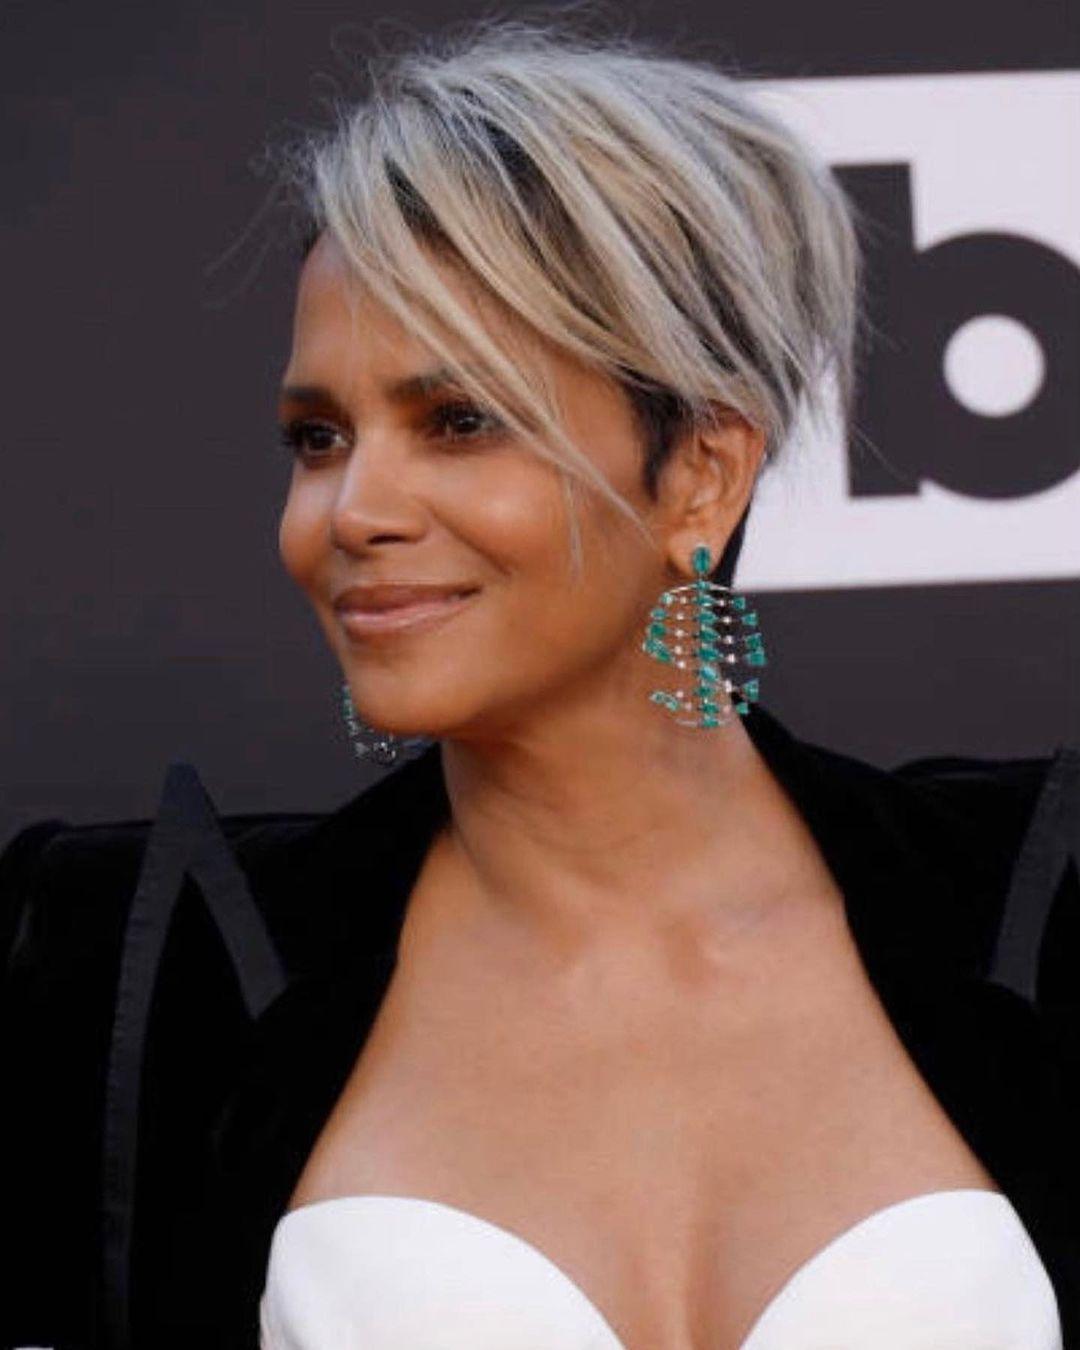 Halle Berry Honors Her 'Earth Angel' Daughter on Her 14th Birthday